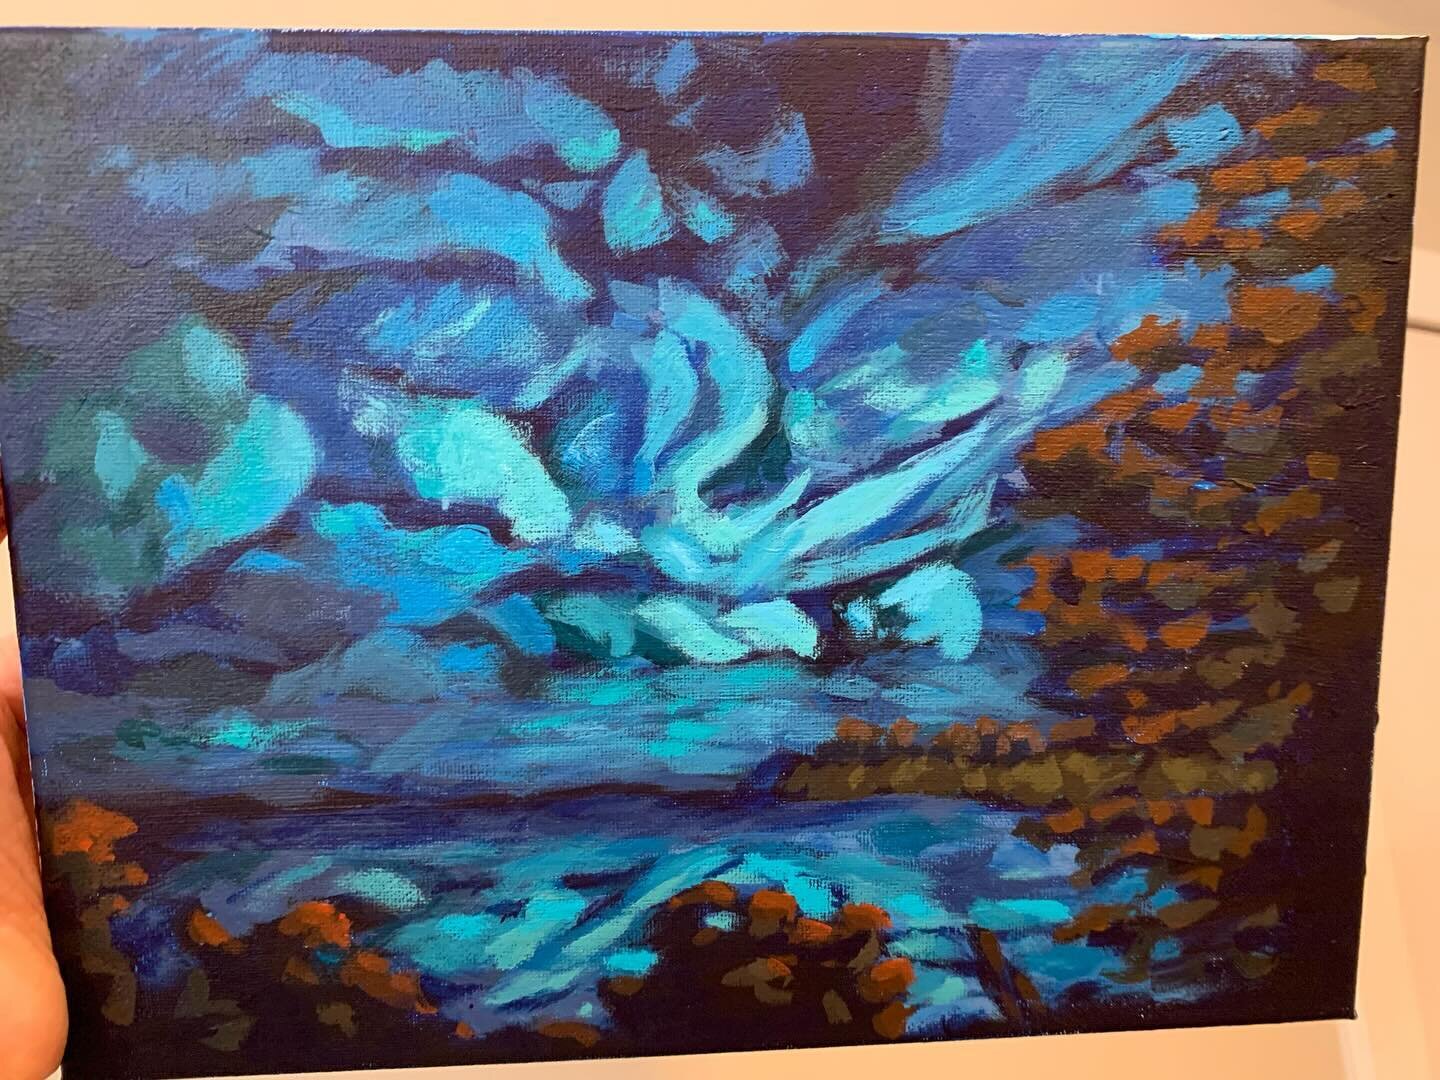 Night Sky Over Water. 9x12.

Felt like I haven't been pushing my colors as much as I'd like to so for this one I painted about 50% of it and then picked a random color to add to it. 

I grabbed burnt sienna, painted the trees, then added green to the